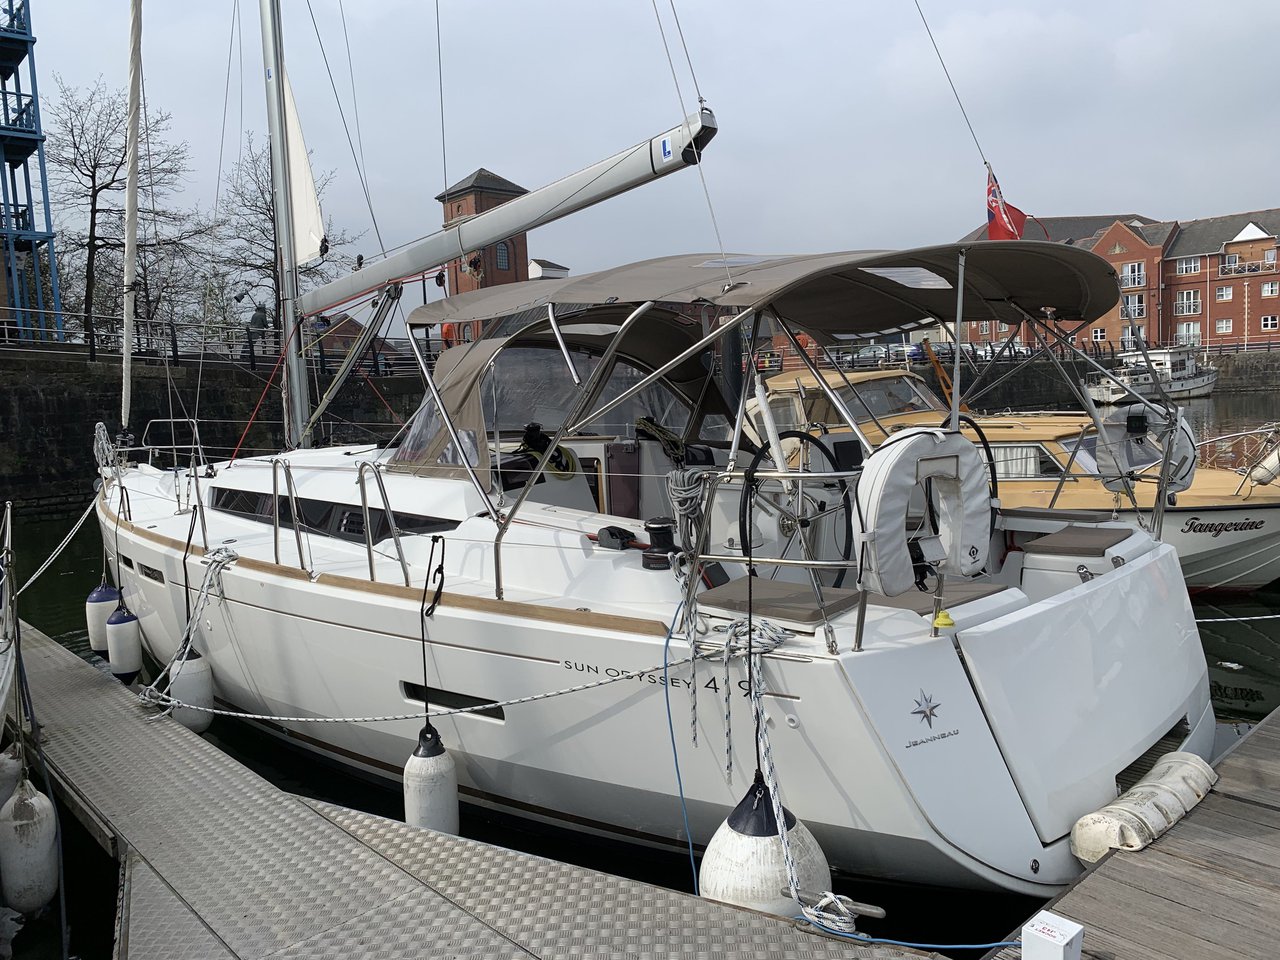 Sun Odyssey 419 - Yacht Charter United Kingdom & Boat hire in United Kingdom Scotland Firth of Clyde Largs Largs Yacht Haven 1